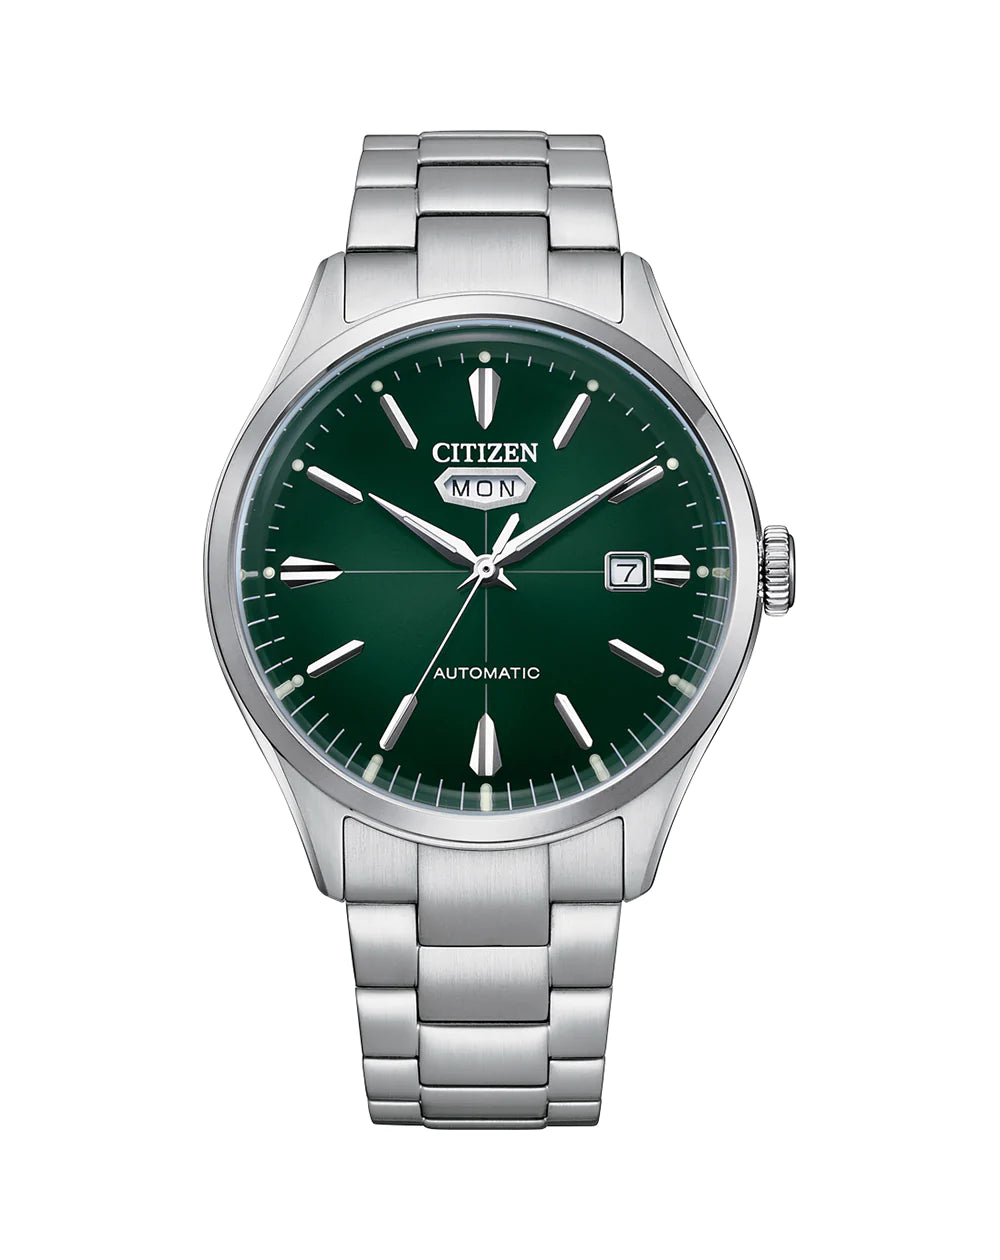 Gents Automatic Citizen Watch with Green Dial